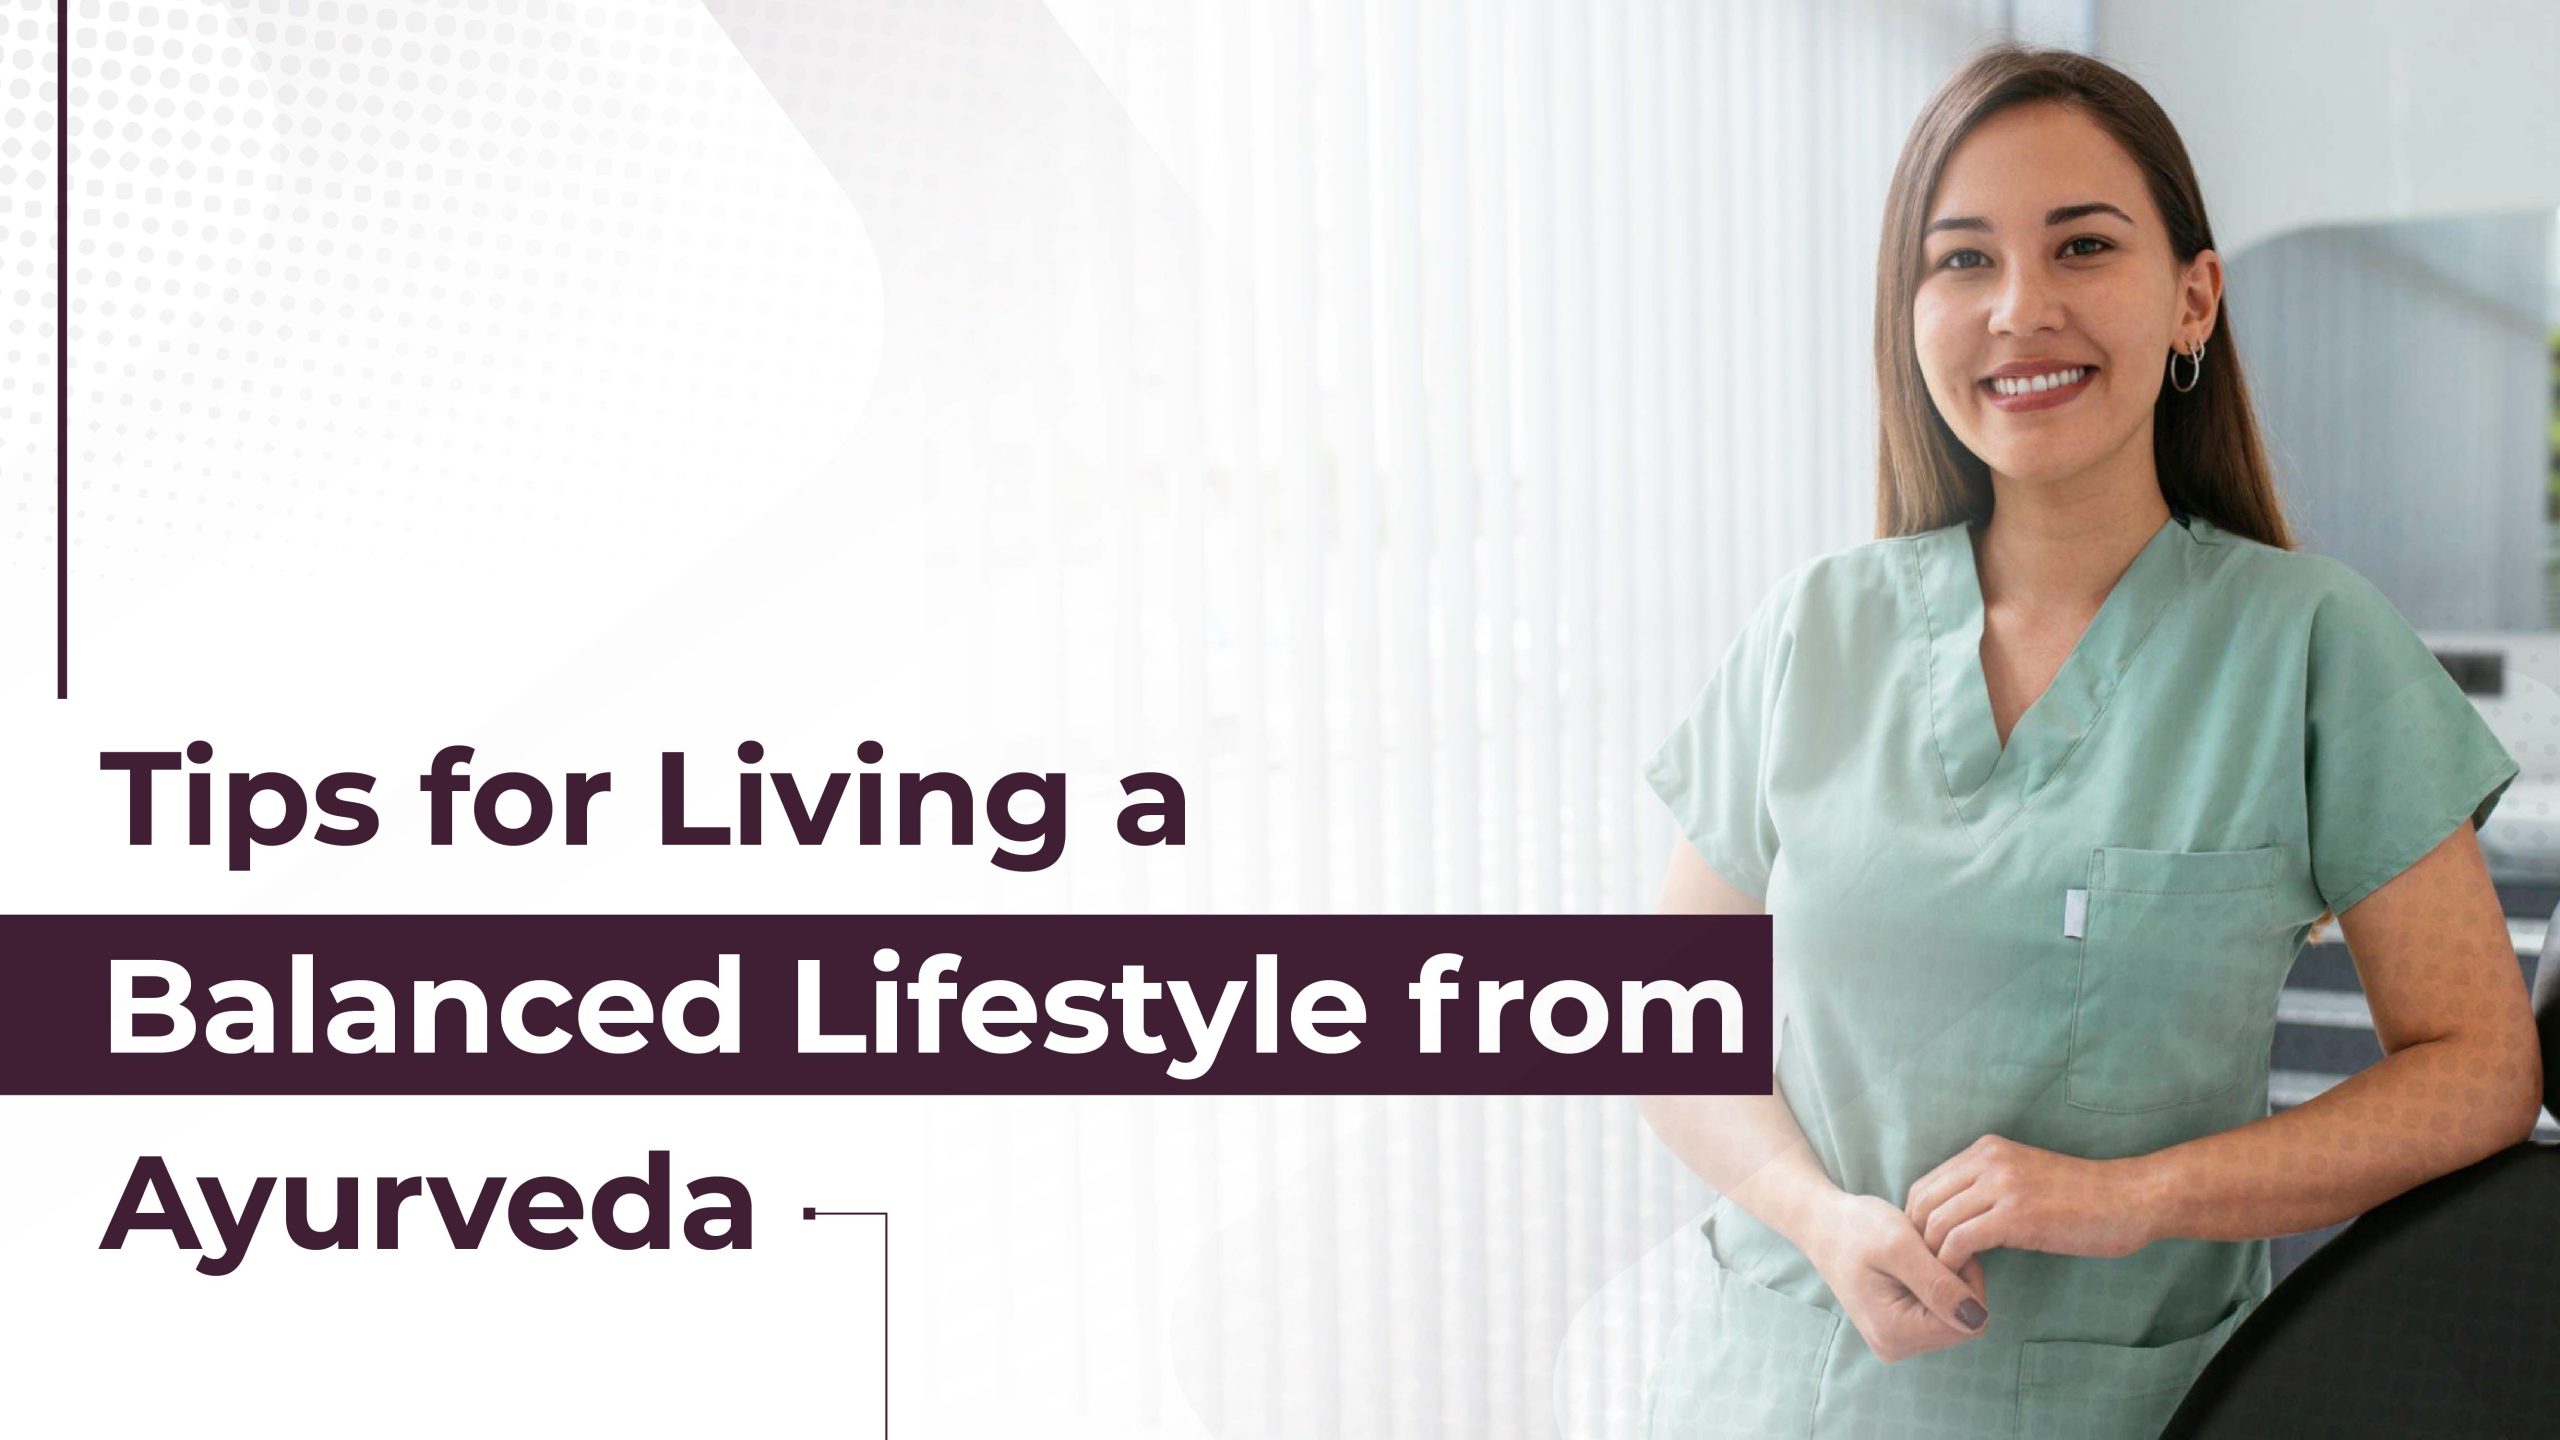 Tips for Living a Balanced Lifestyle from Ayurveda